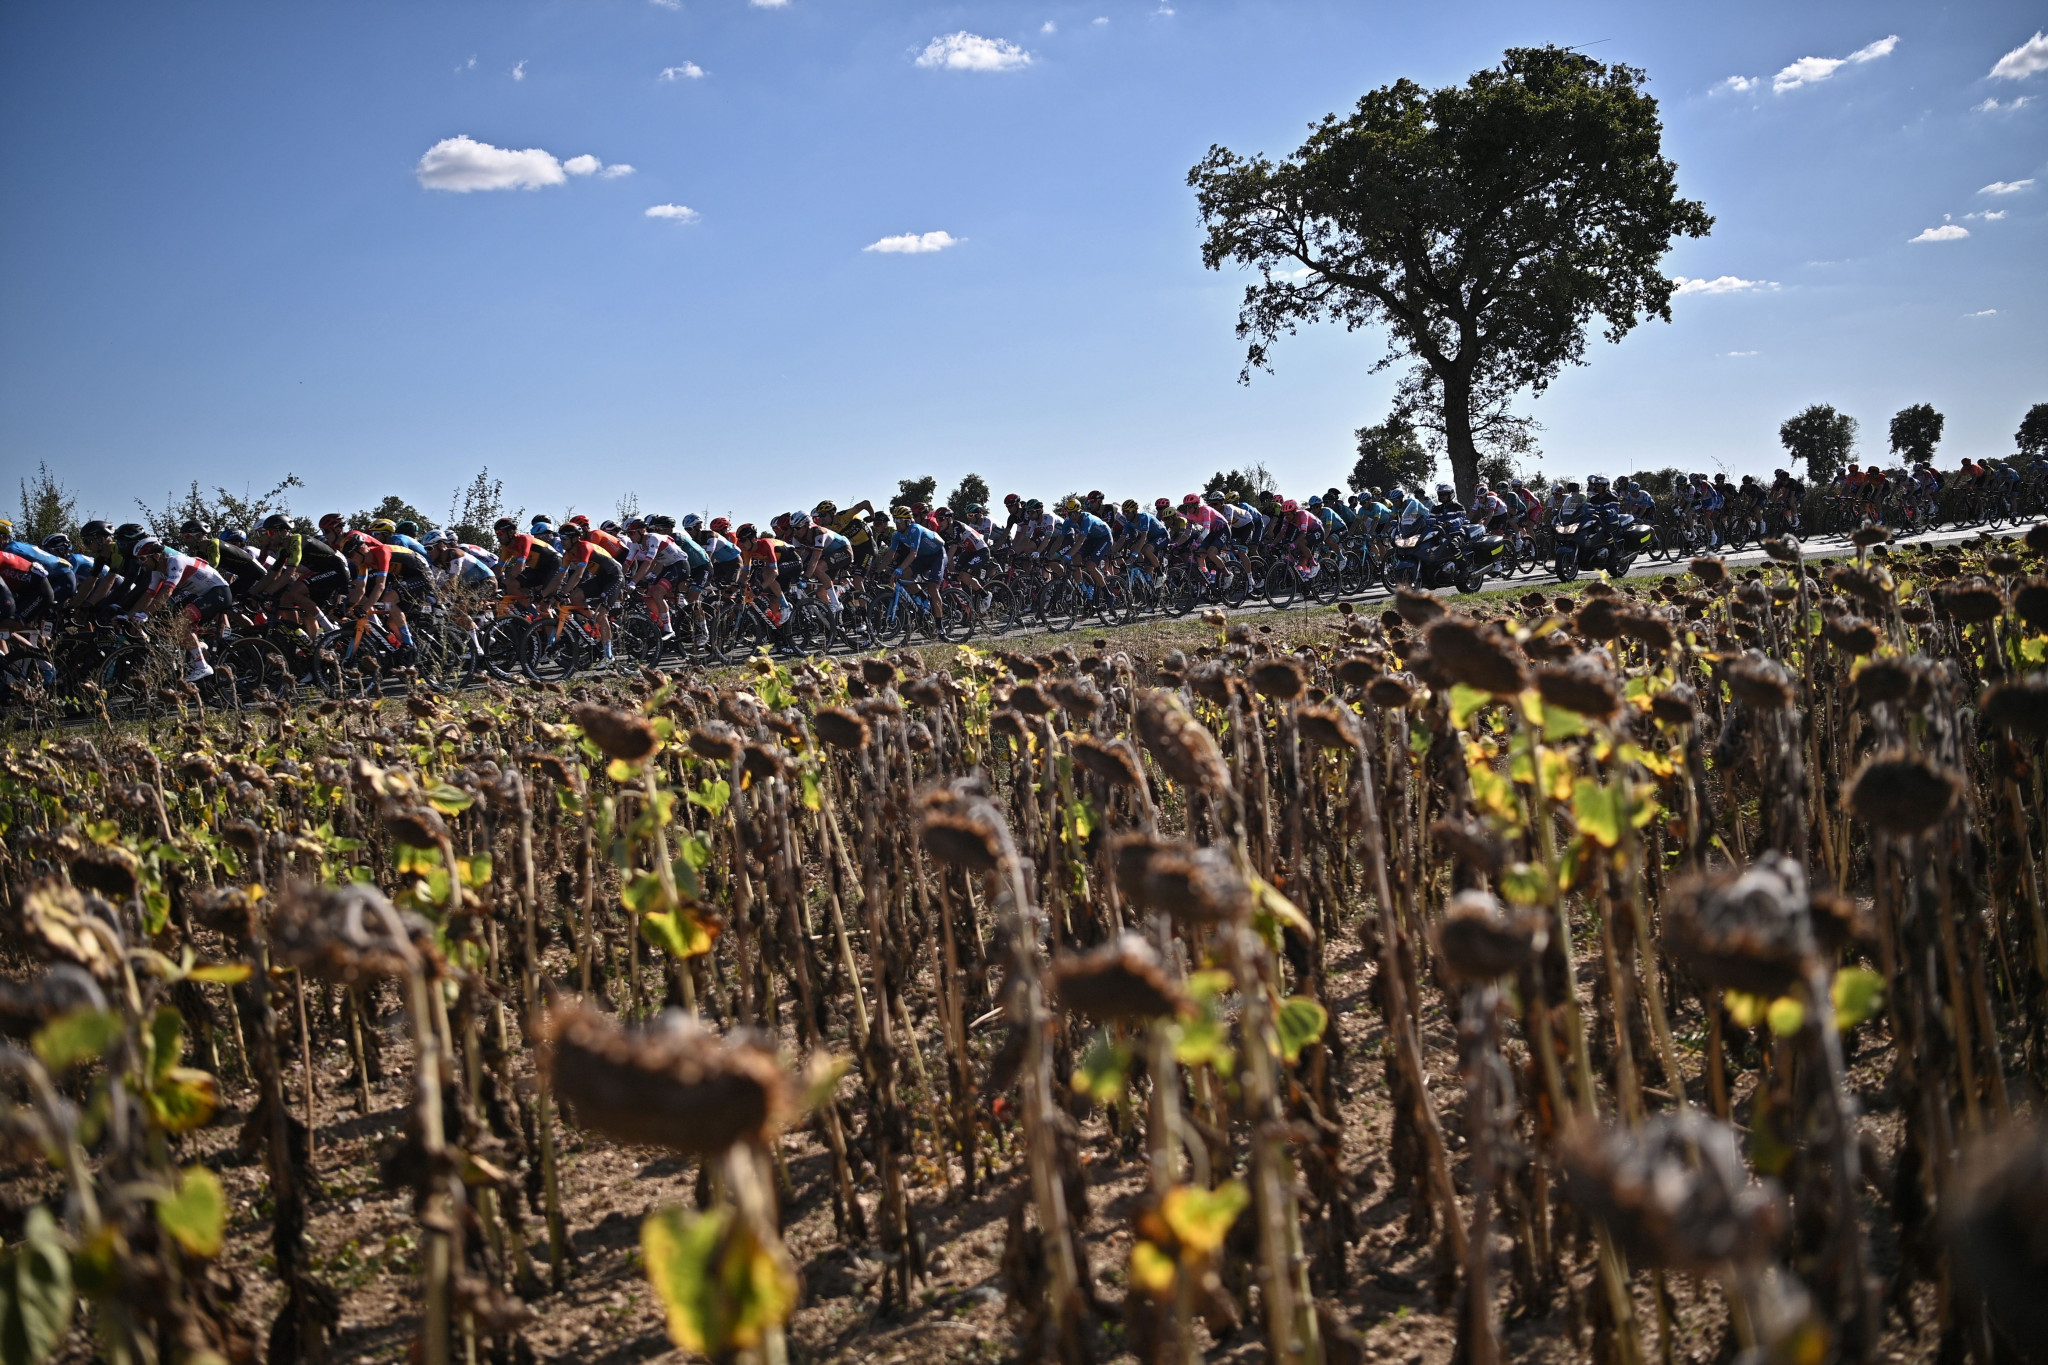 The sunflowers are normally blooming in the summer when the Tour de France is held in July and August, but in September the fields are brown rather than yellow ©Getty Images